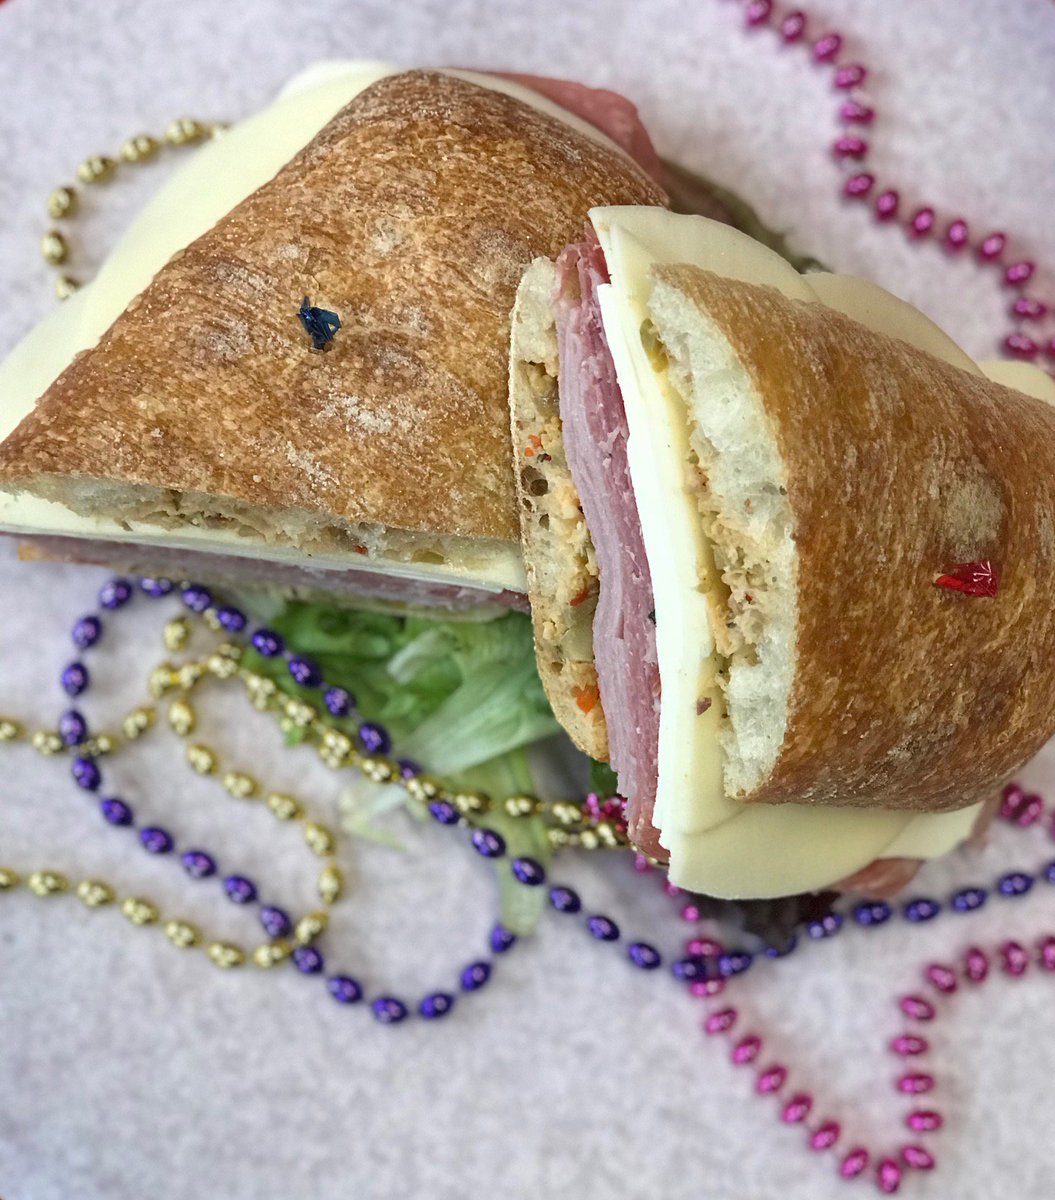 #FatTuesday is here and so is our Muffuletta! $7.00 today instead of the regular $9.99! Try one today, it's a Fat Tuesday Classic!